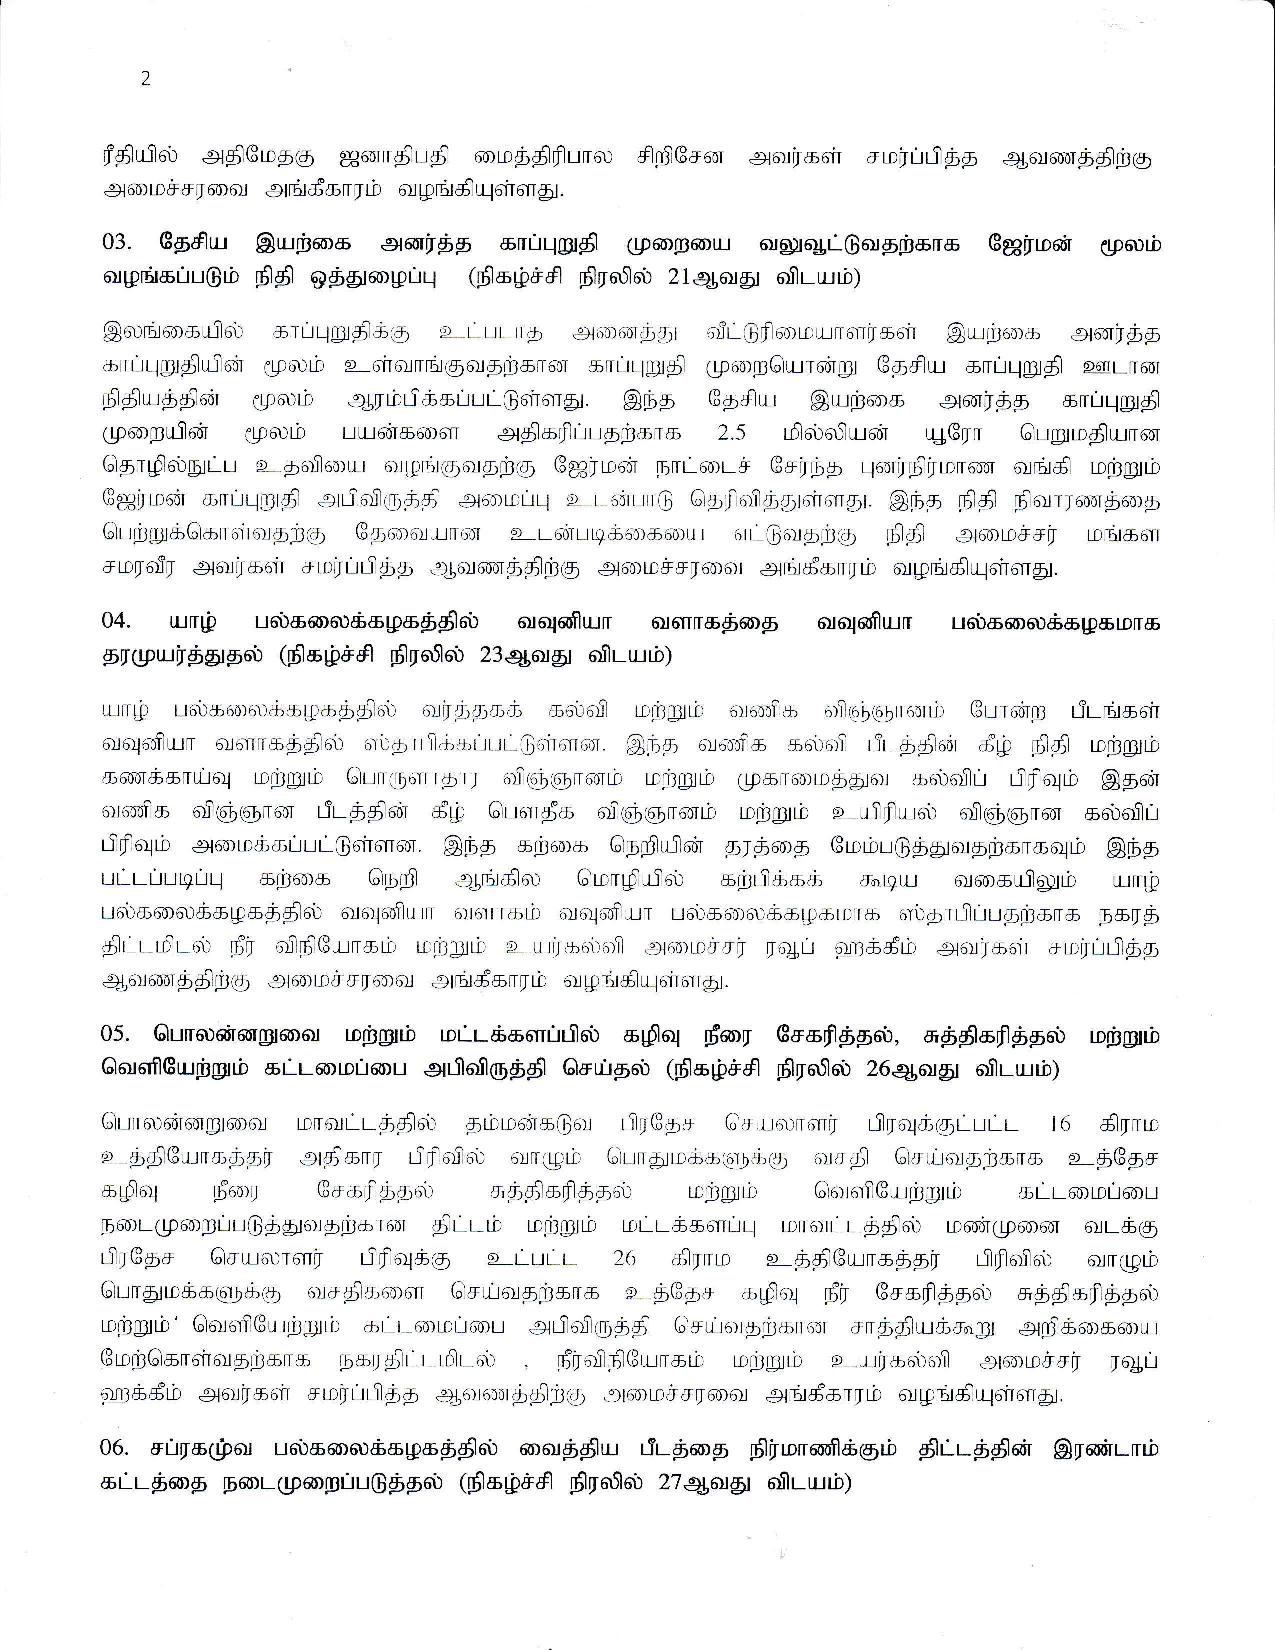 Cabinet Decision on 21.05.2019 Tamil page 003